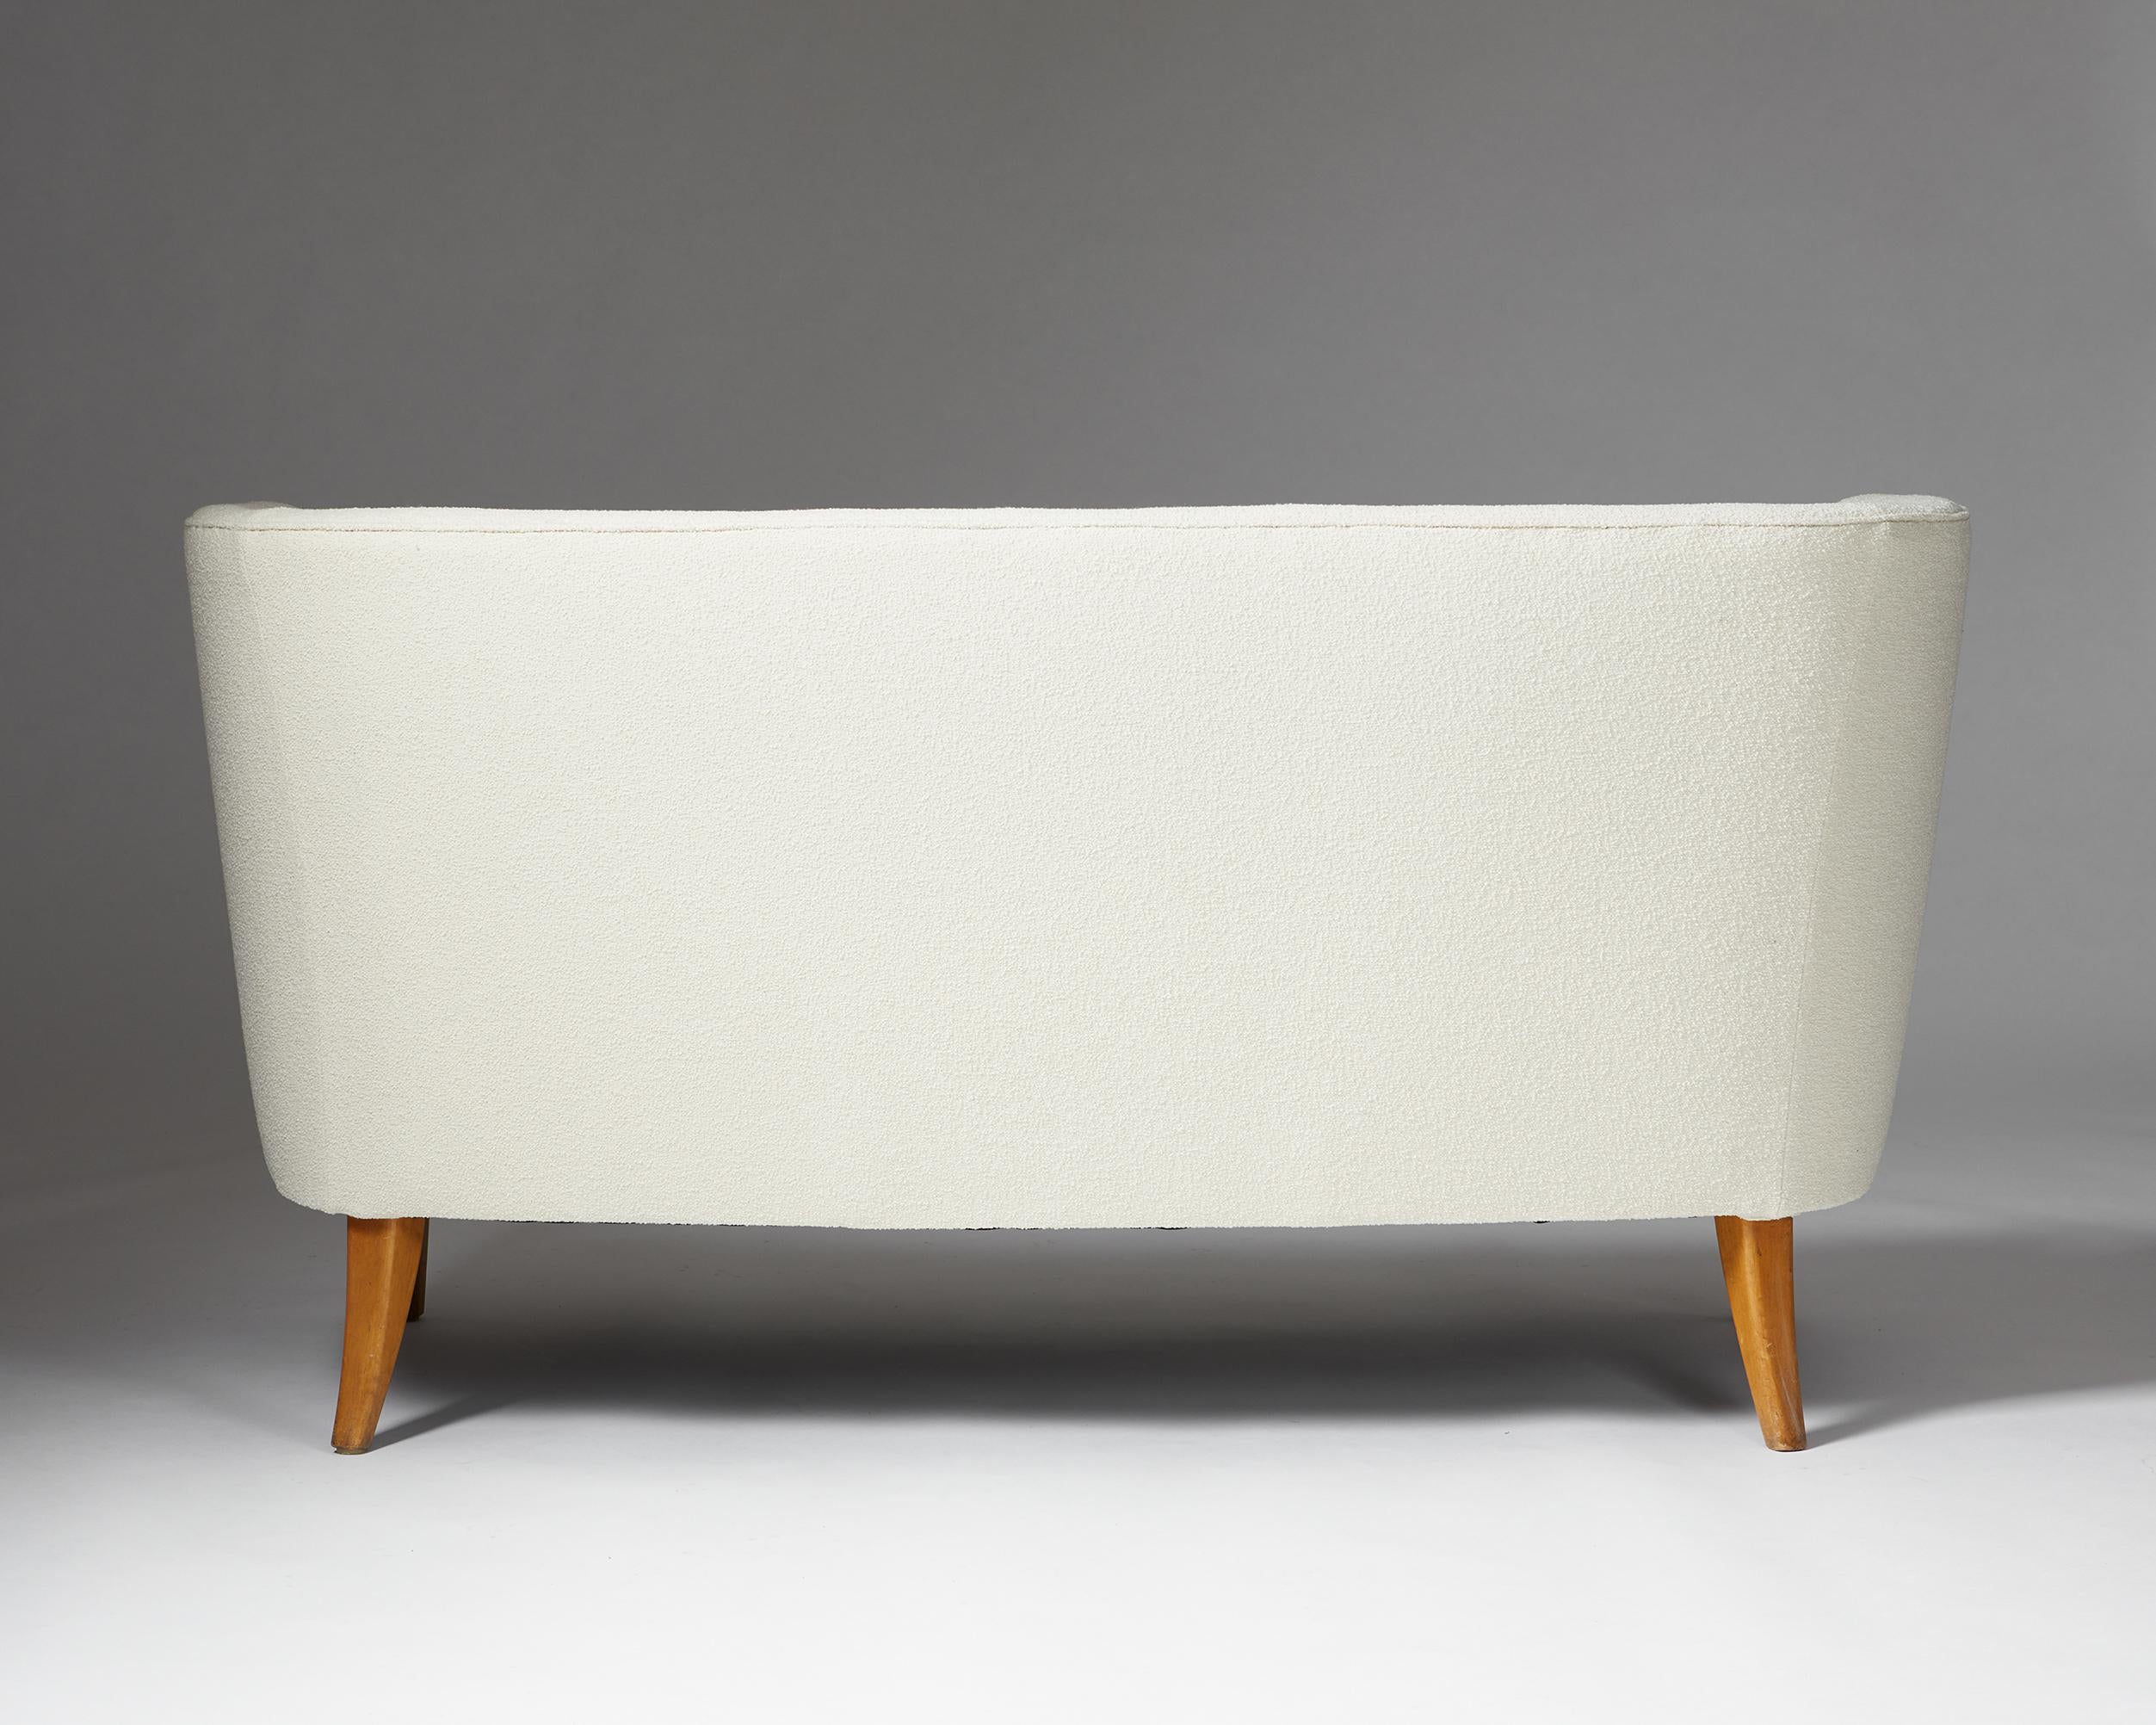 Finnish Sofa ‘Royal’ Designed by Werner West for Oy Stockmann AB, Finland, 1950's For Sale